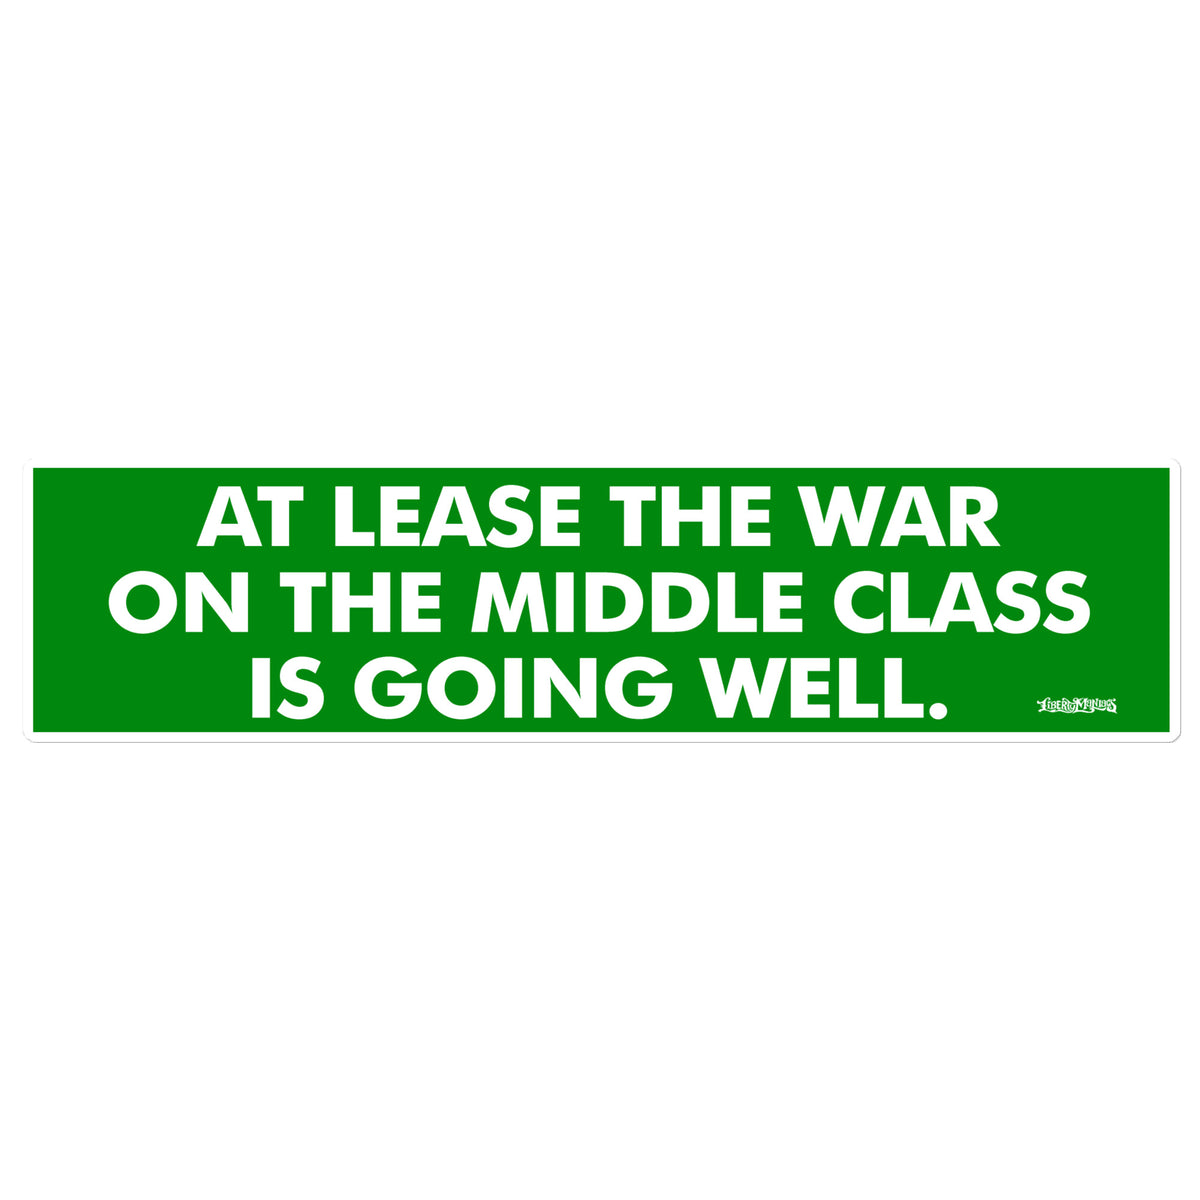 At Least the War on the Middle Class is Going Well Bumper Sticker